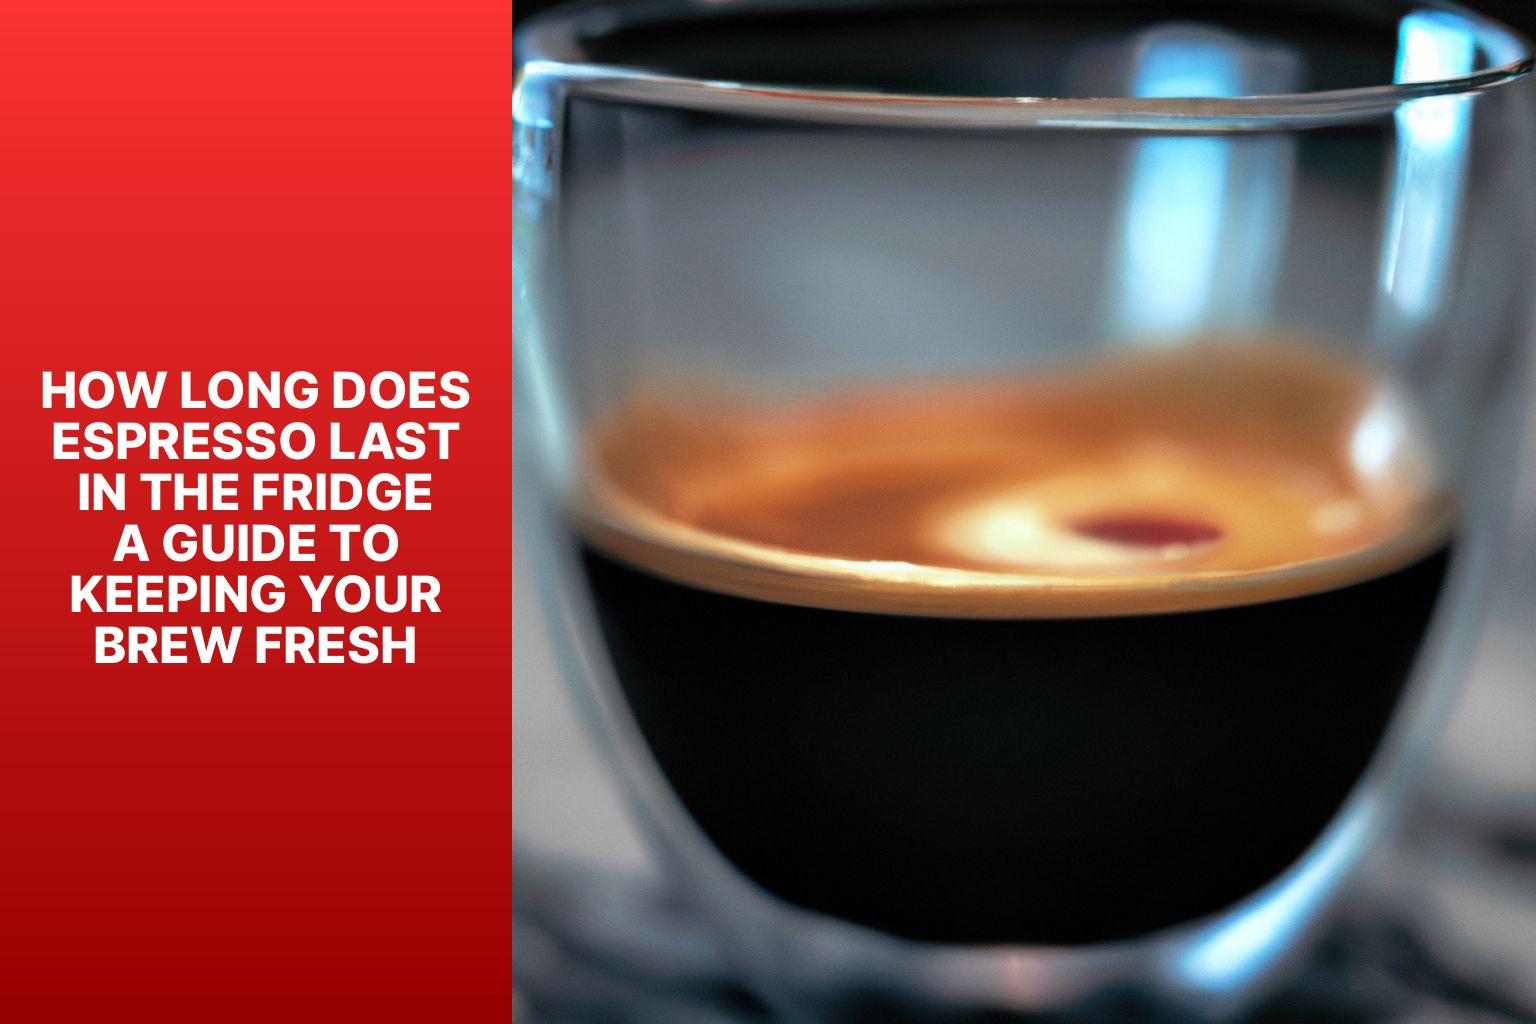 How Long Does Espresso Last in the Fridge? A Guide to Keeping Your Brew Fresh